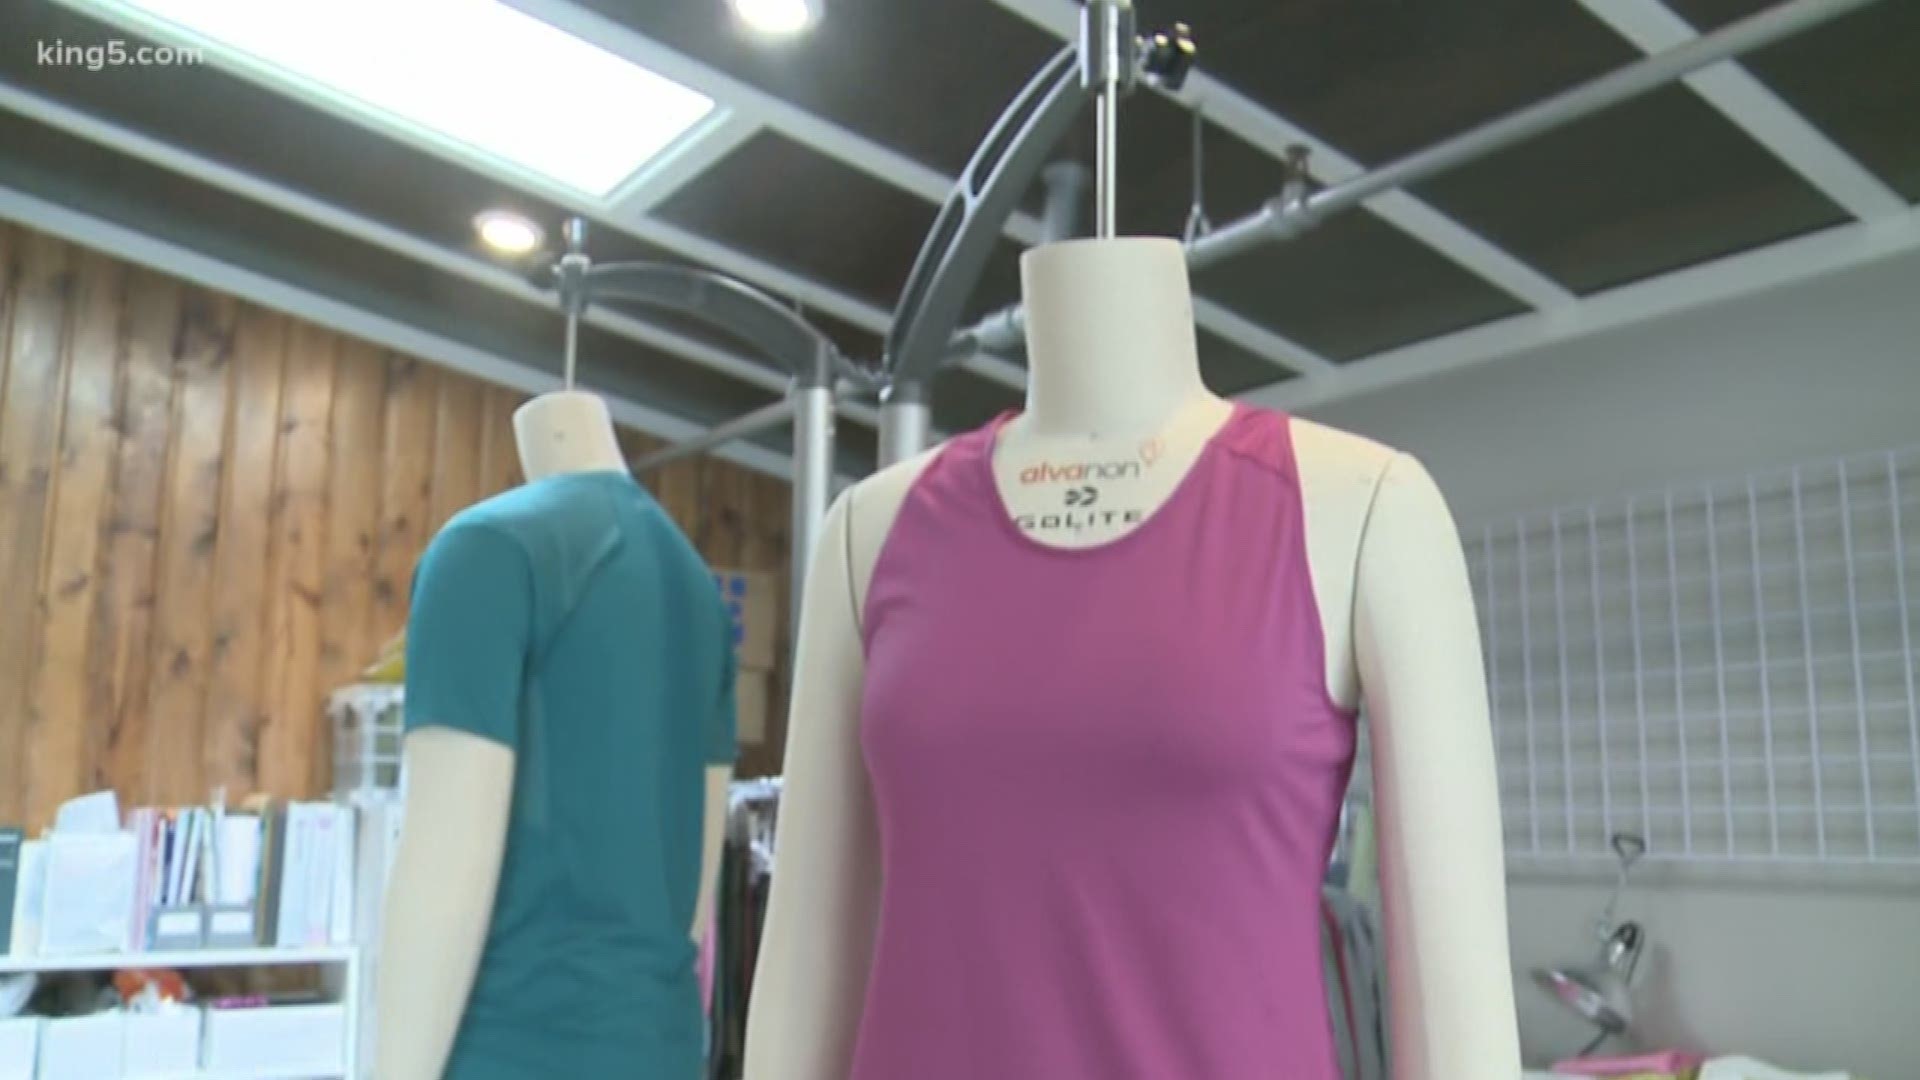 A Seattle company is making clothing out of plastic bottles from Taiwan. KING 5 Environmental Reporter Alison Morrow reports.